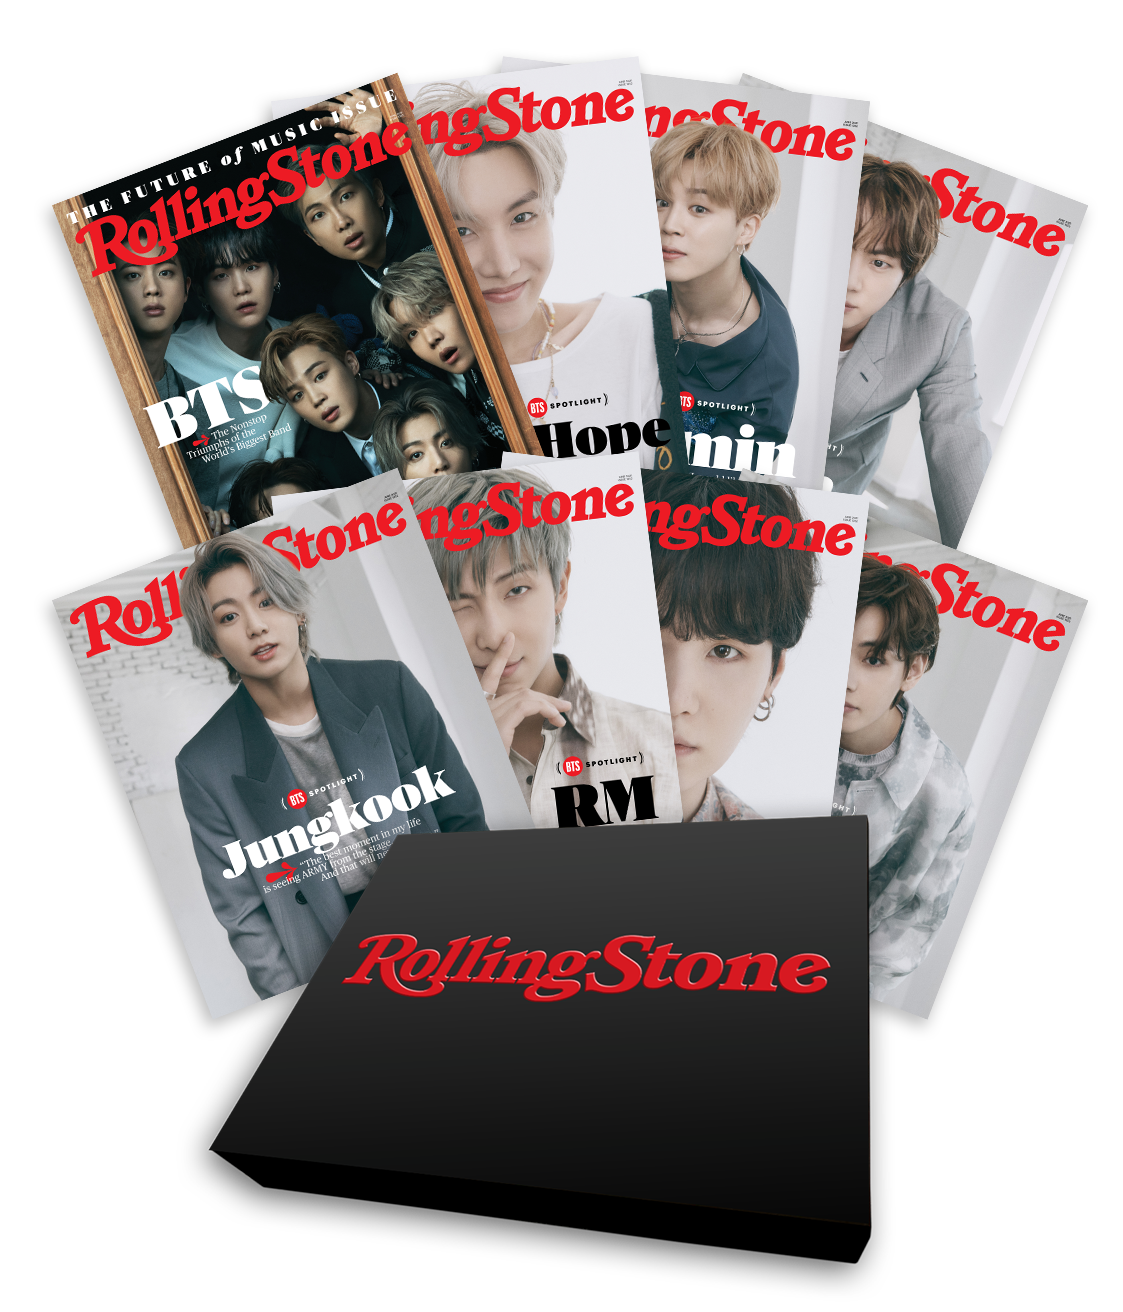 BTS Models Louis Vuitton & a Mix of Impressive Footwear for 'Rolling Stone'  Cover